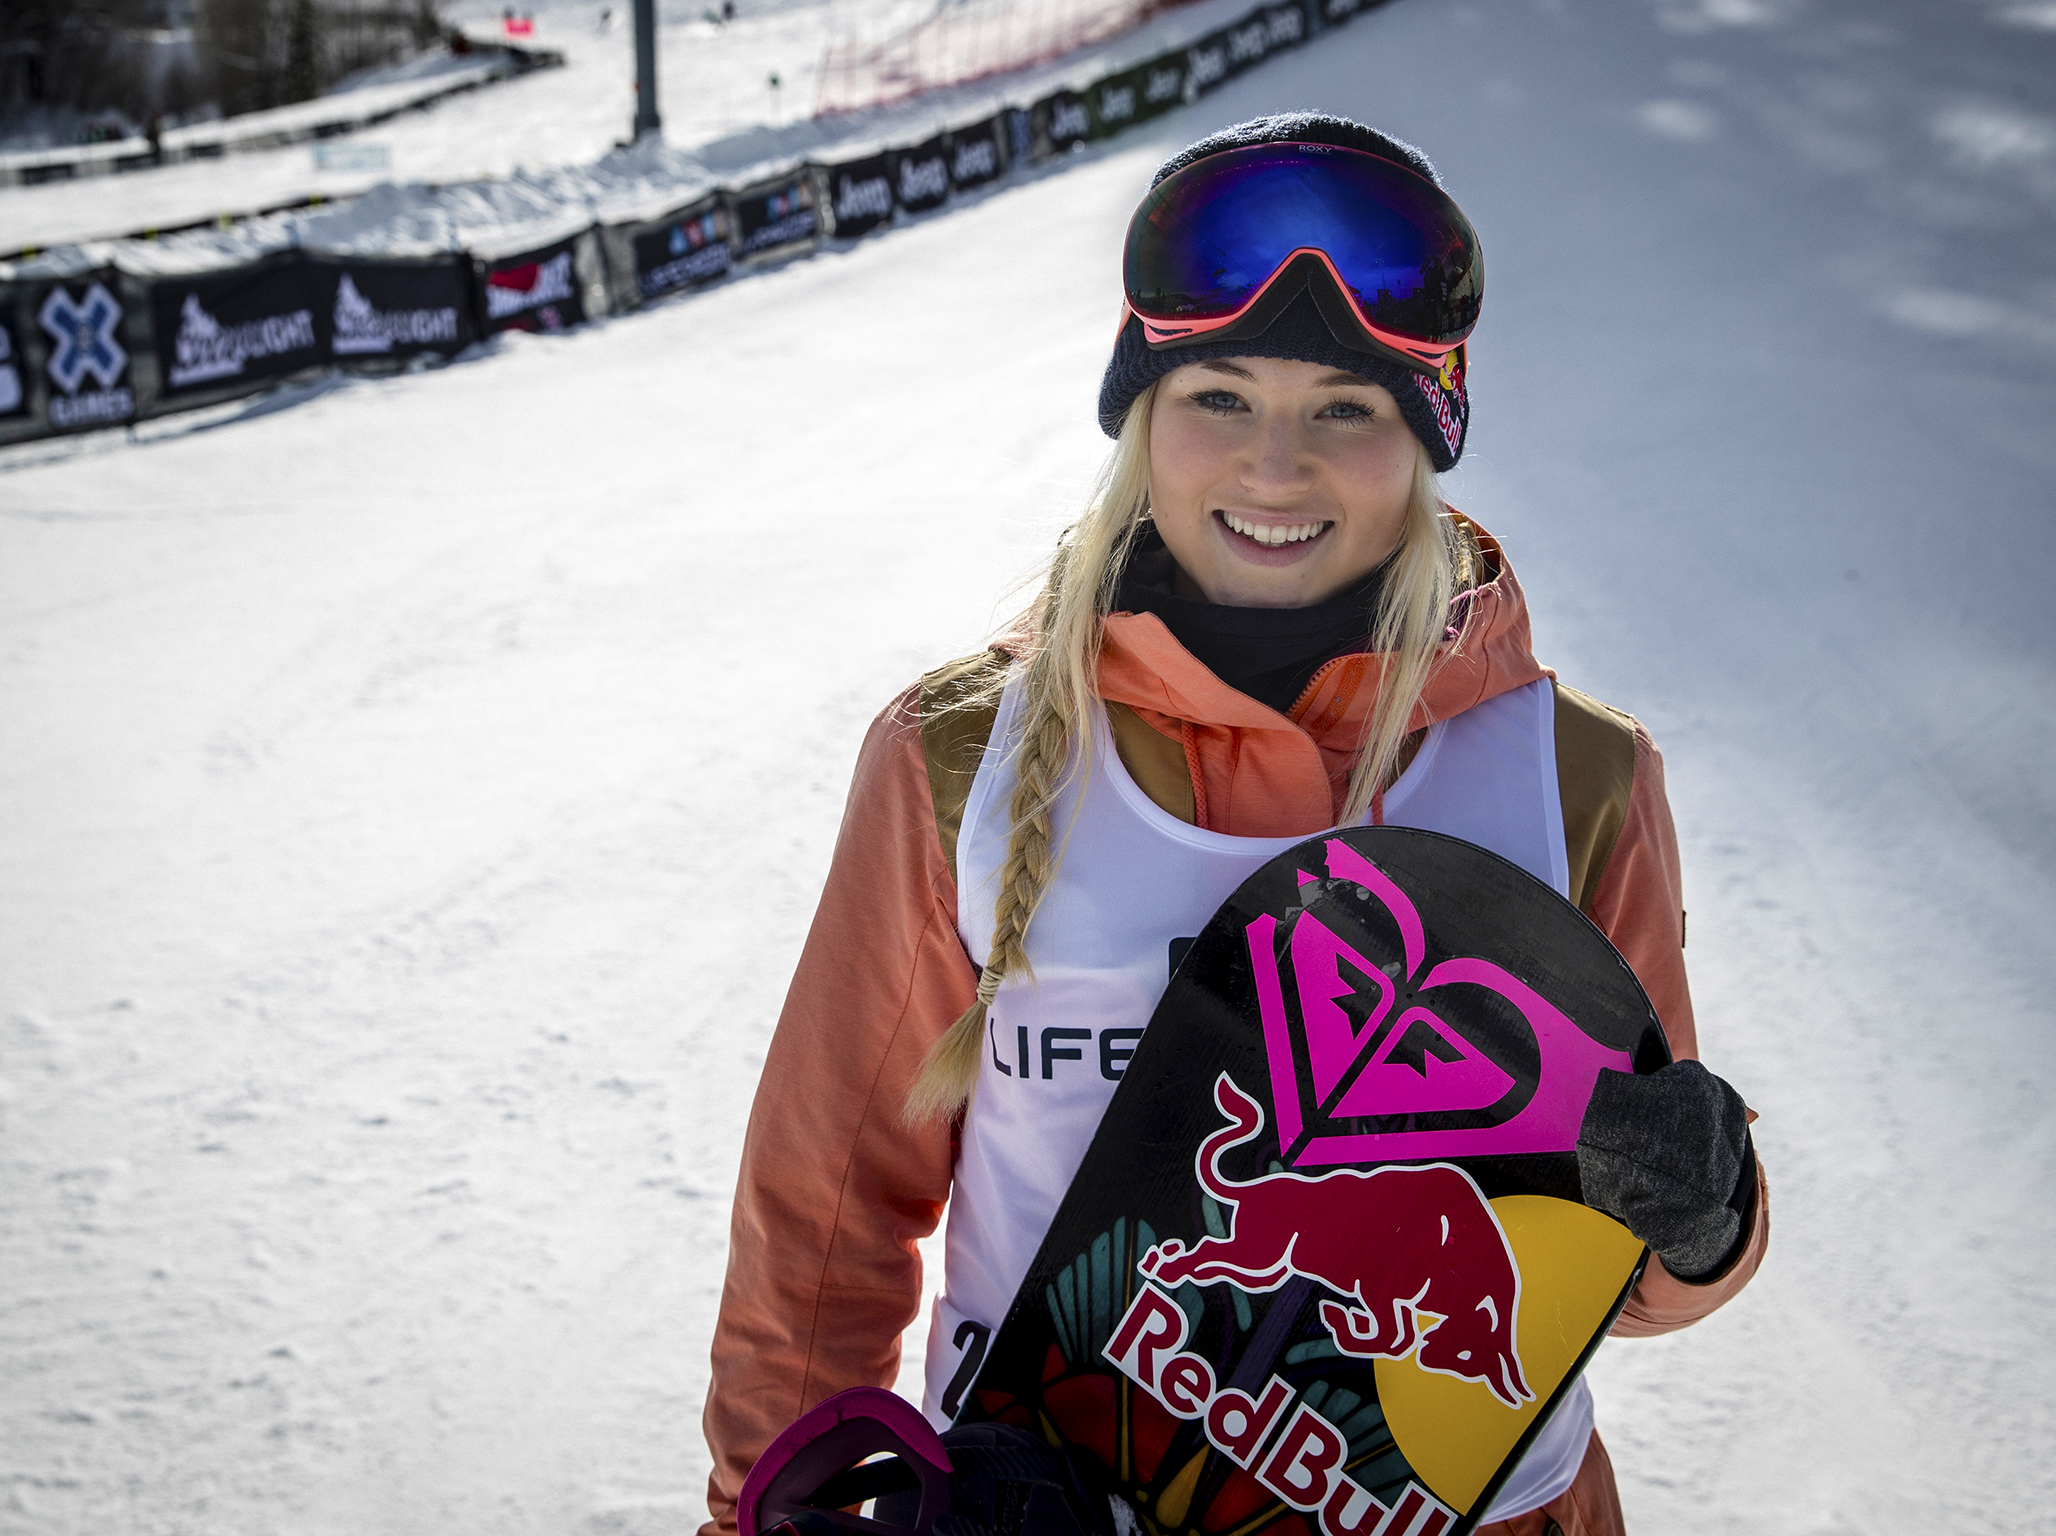 Meet Katie Ormerod, the rising snowboard star who could become the face of Britains Winter Olympics The Independent The Independent